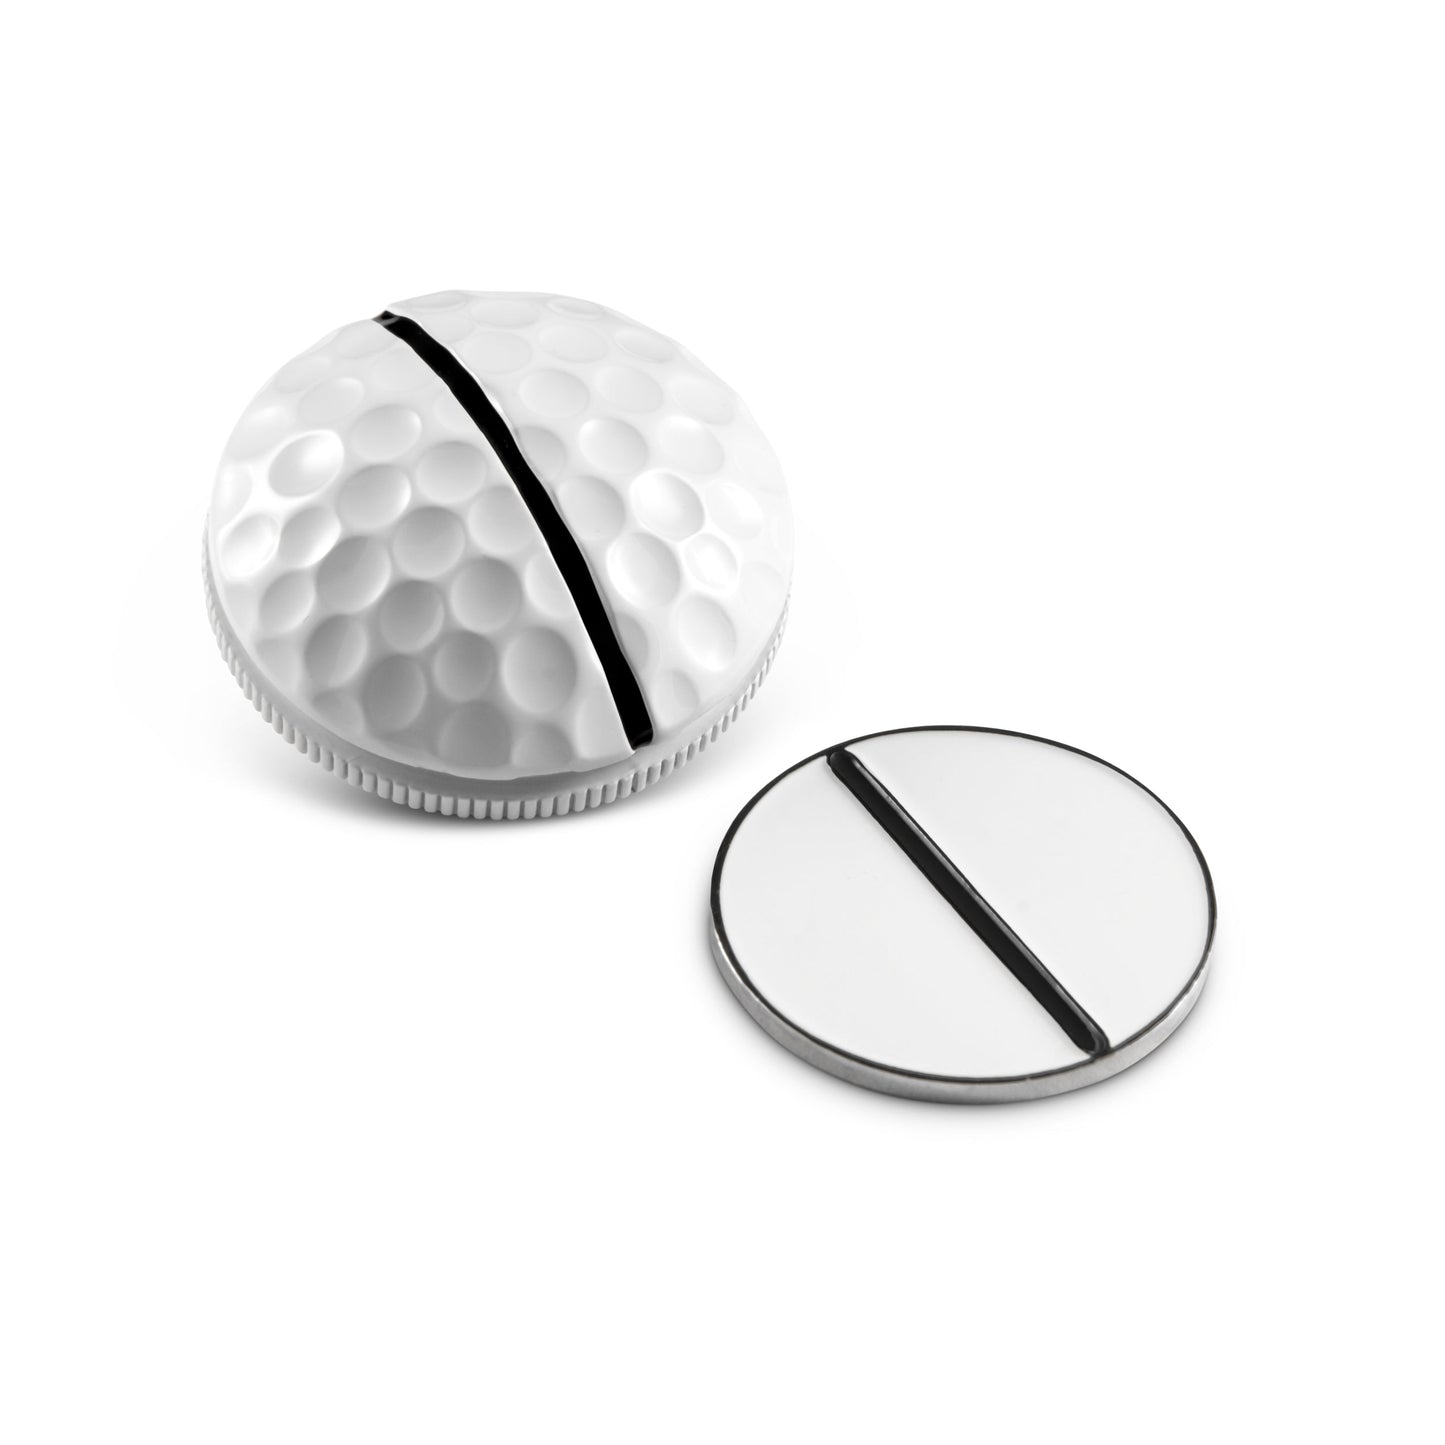 1 RAIL DIMPLE-DOMED + COIN by OnPointGolf.us